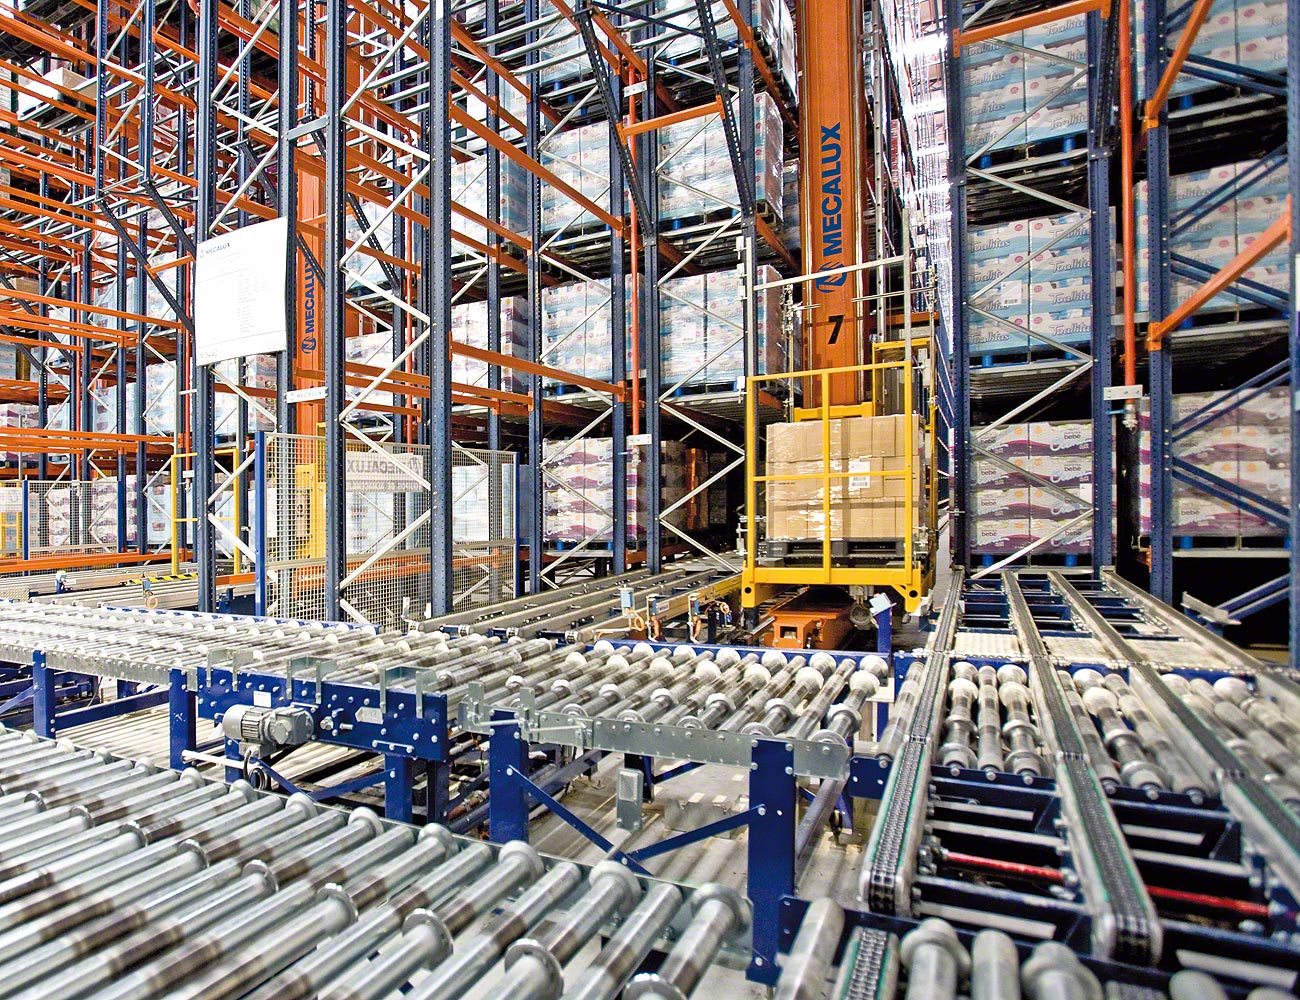 AS/RS Stacker Cranes for Pallets